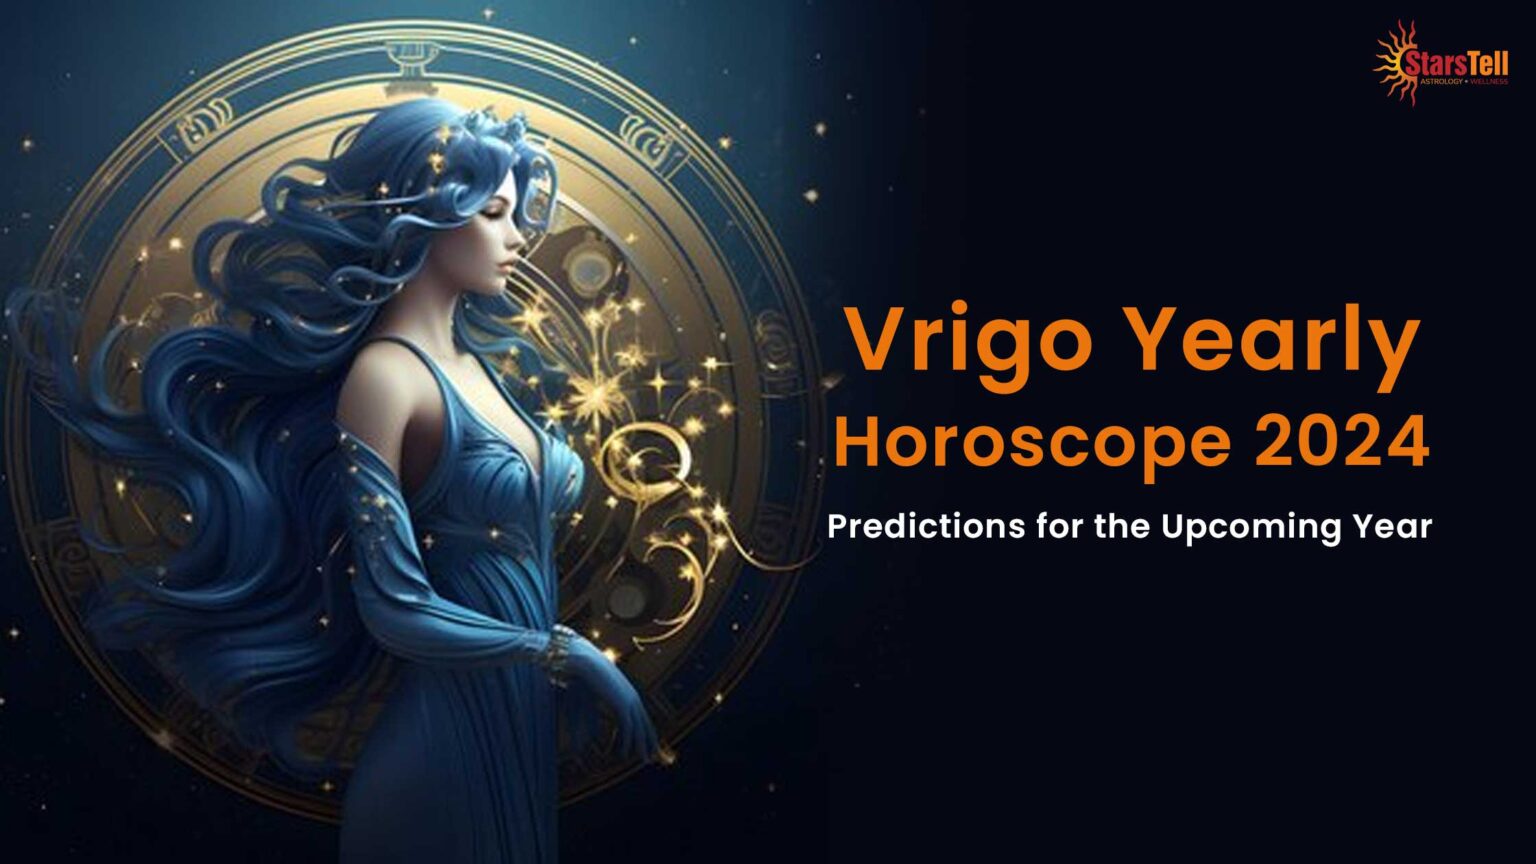 Virgo Yearly Horoscope 2024 Predictions for the Year